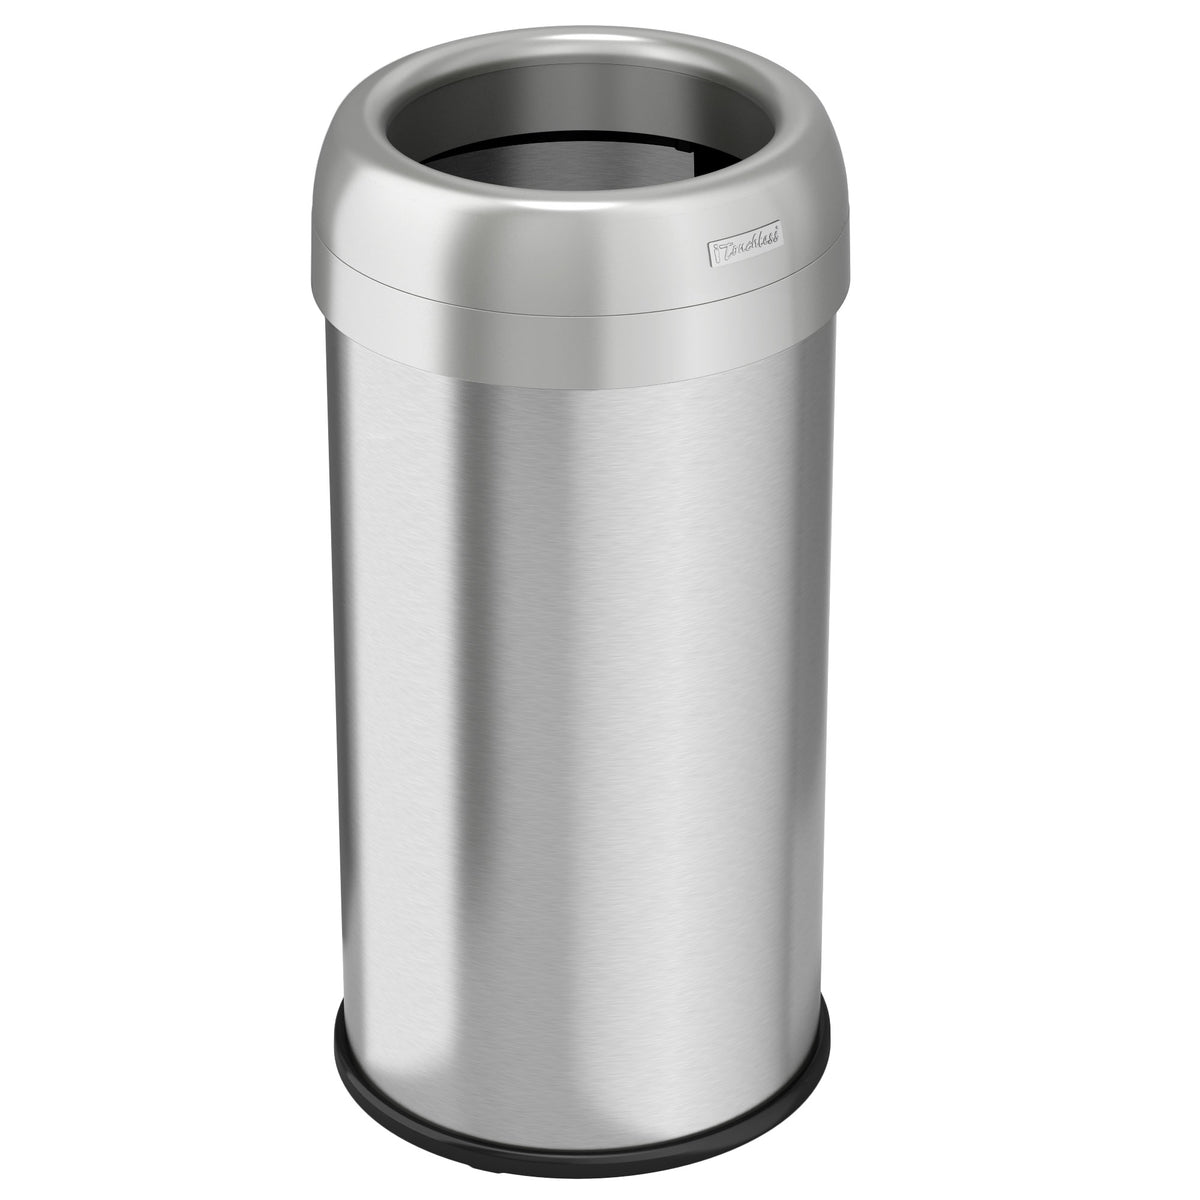 16 Gallon / 60 Liter Round Open Top Trash Can